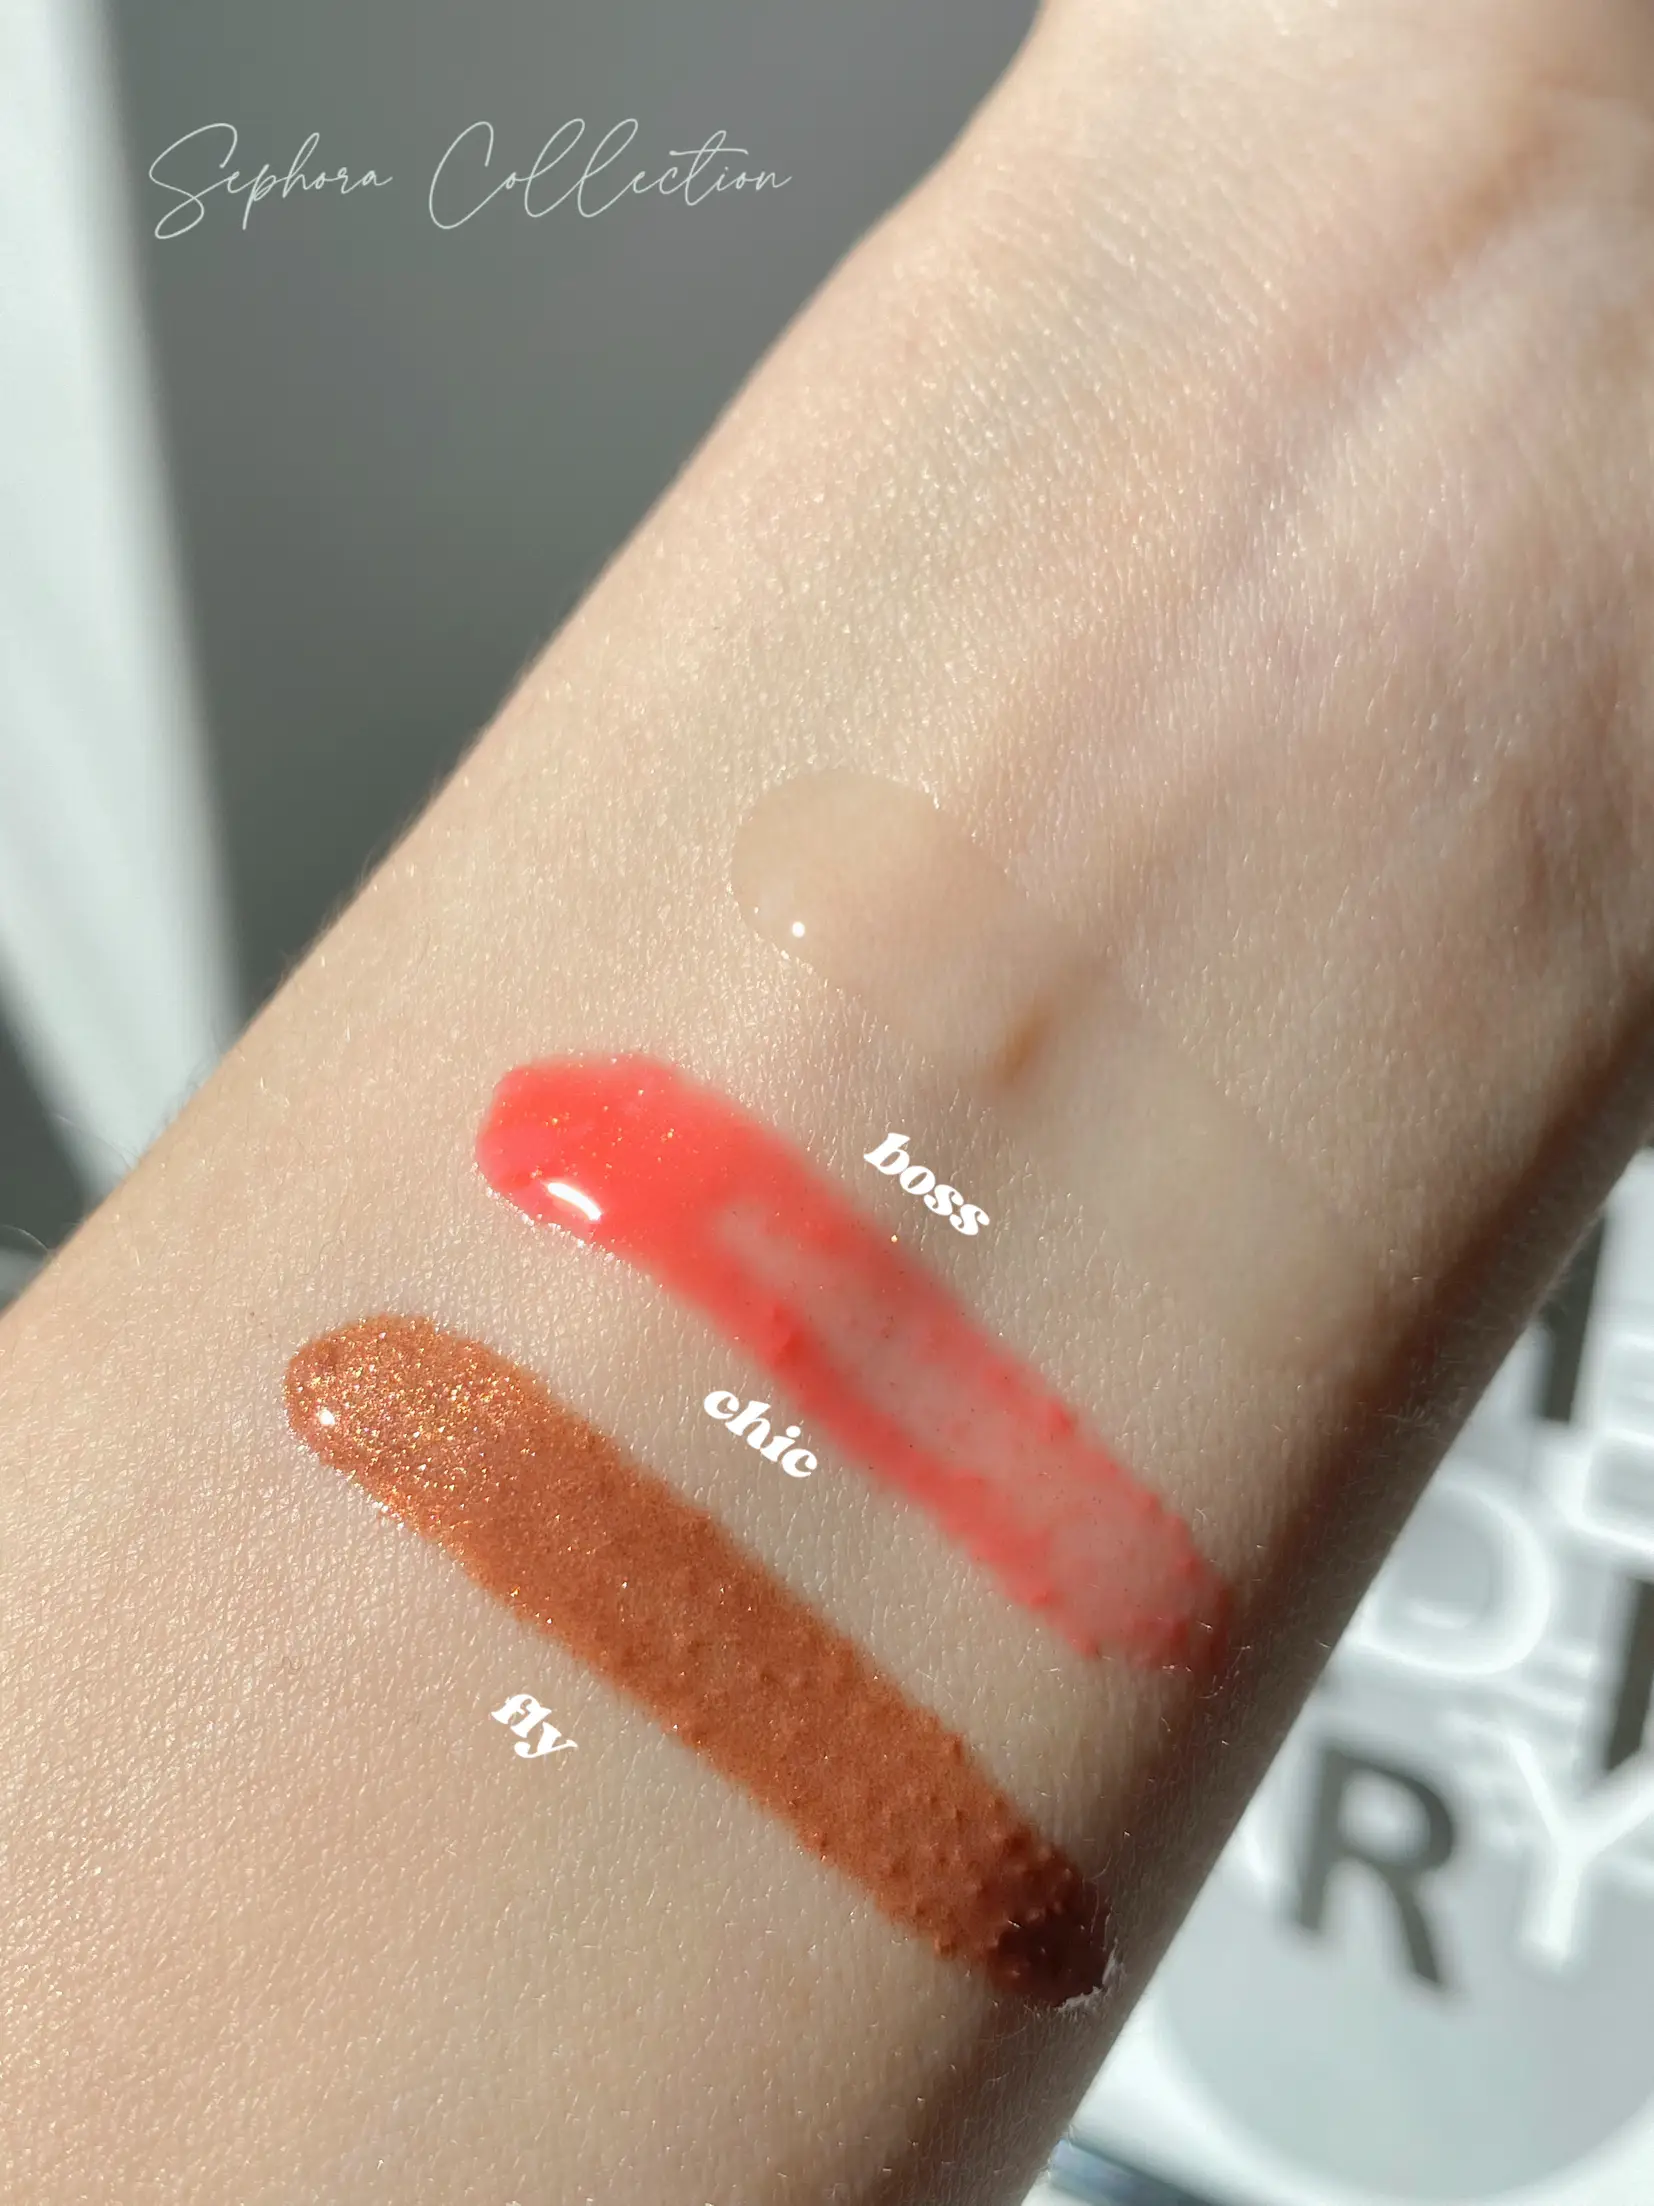 Sephora Collection Glossed lipgloss 💘, Gallery posted by Elisabeth